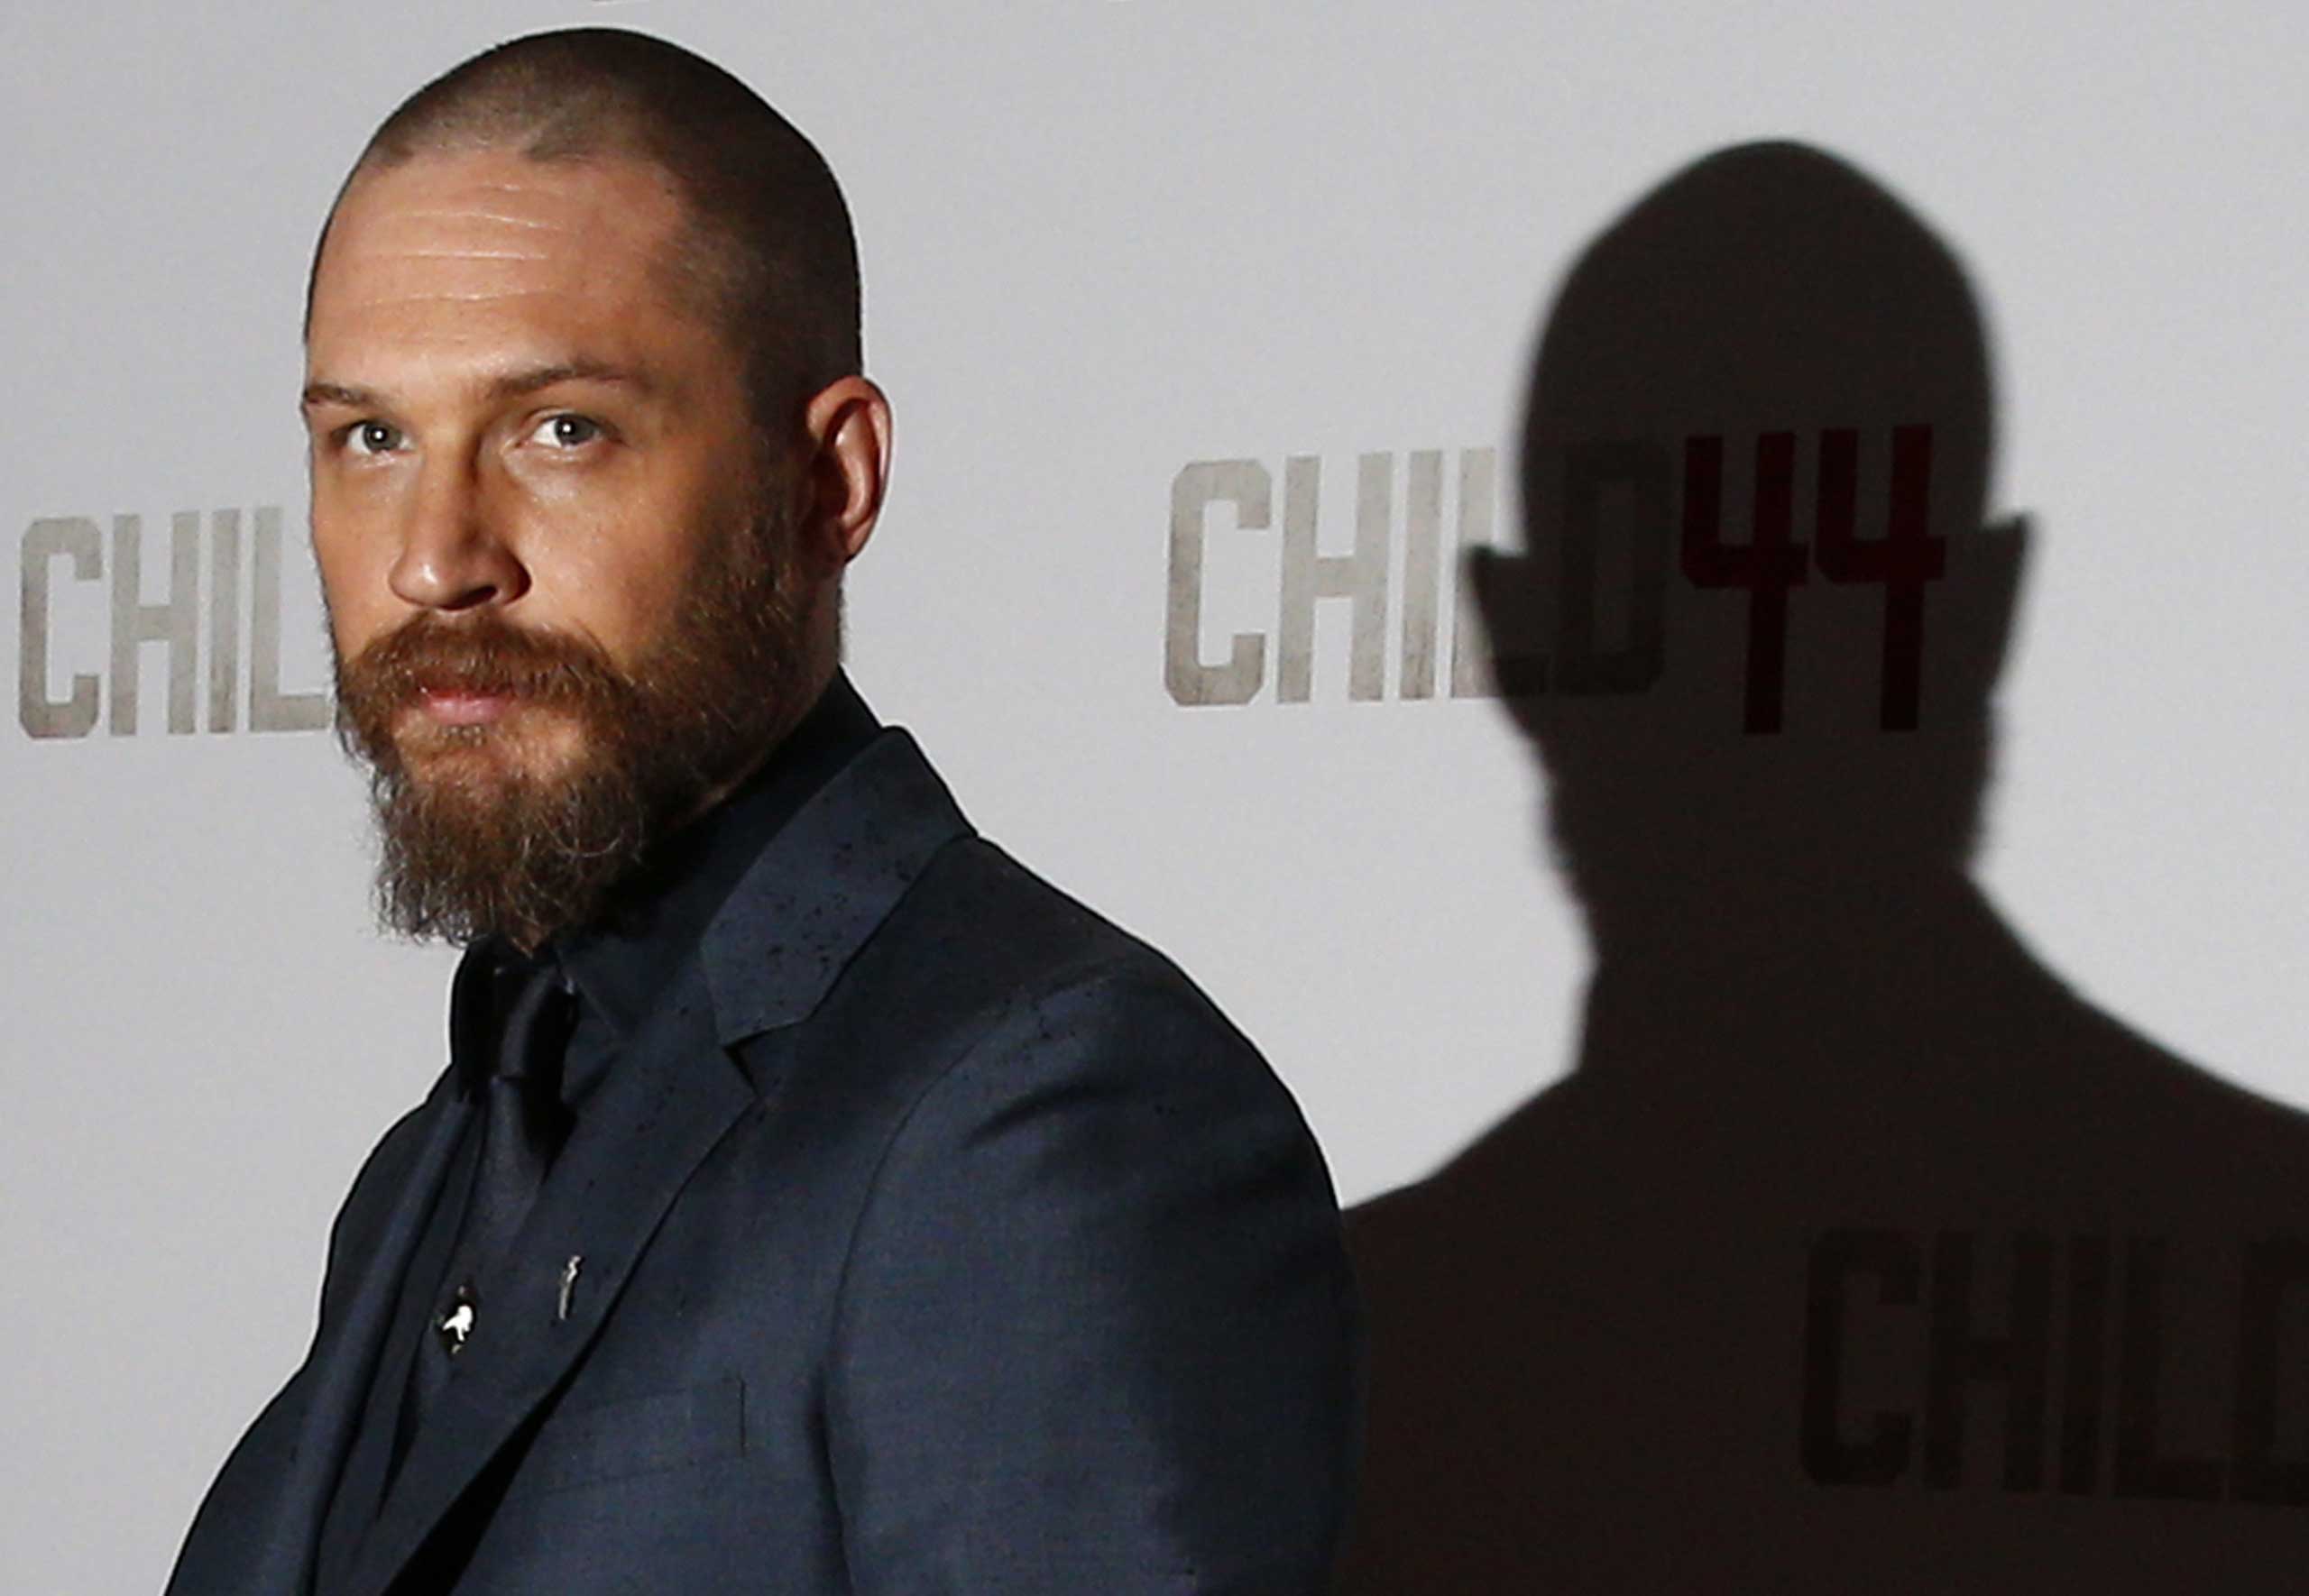 British actor Tom Hardy poses for photographers on the red carpet ahead of the UK premiere of "Child 44" in central London on April 16, 2015. (Justin Tallis—AFP/Getty Images)